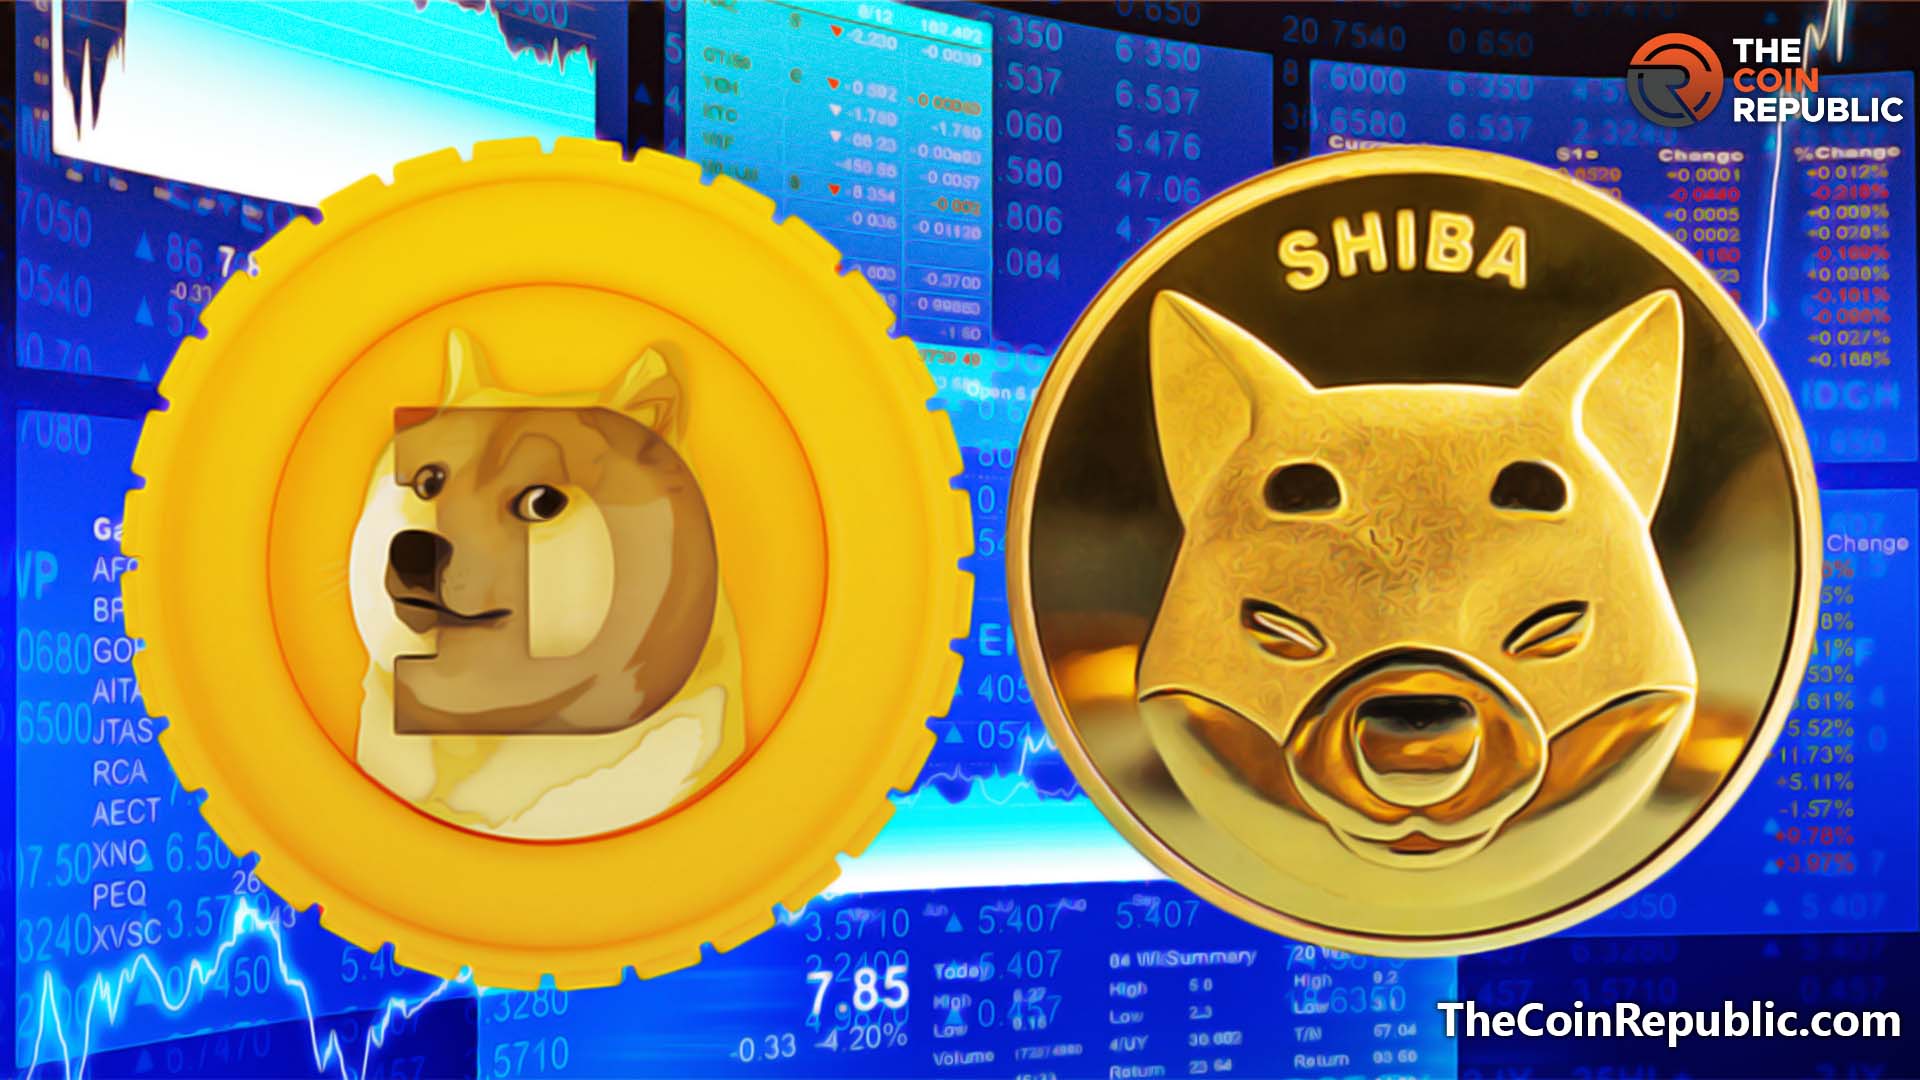 Dogecoin And Shiba Inu Prices Stabilized Due To Token Burning?